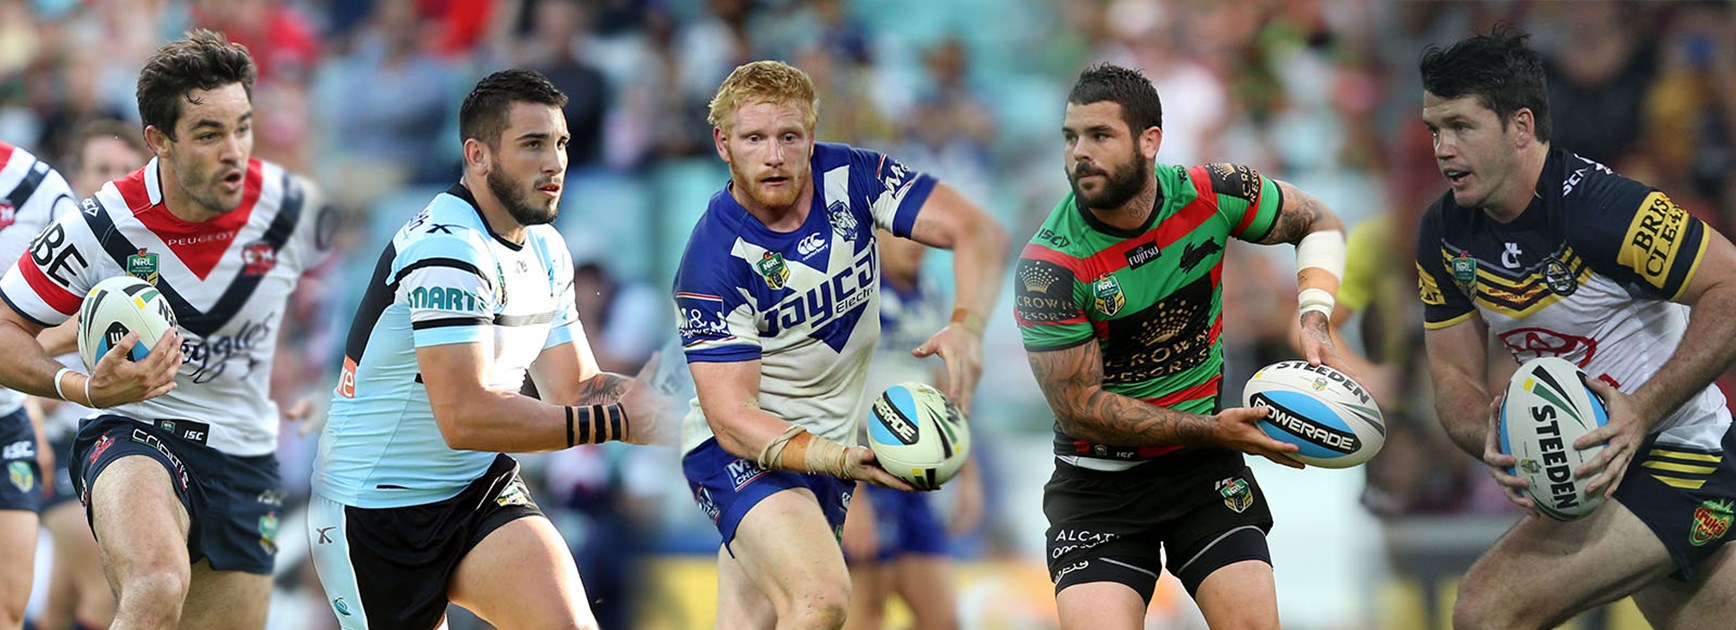 There are some big headaches for NRL Fantasy coaches this week.